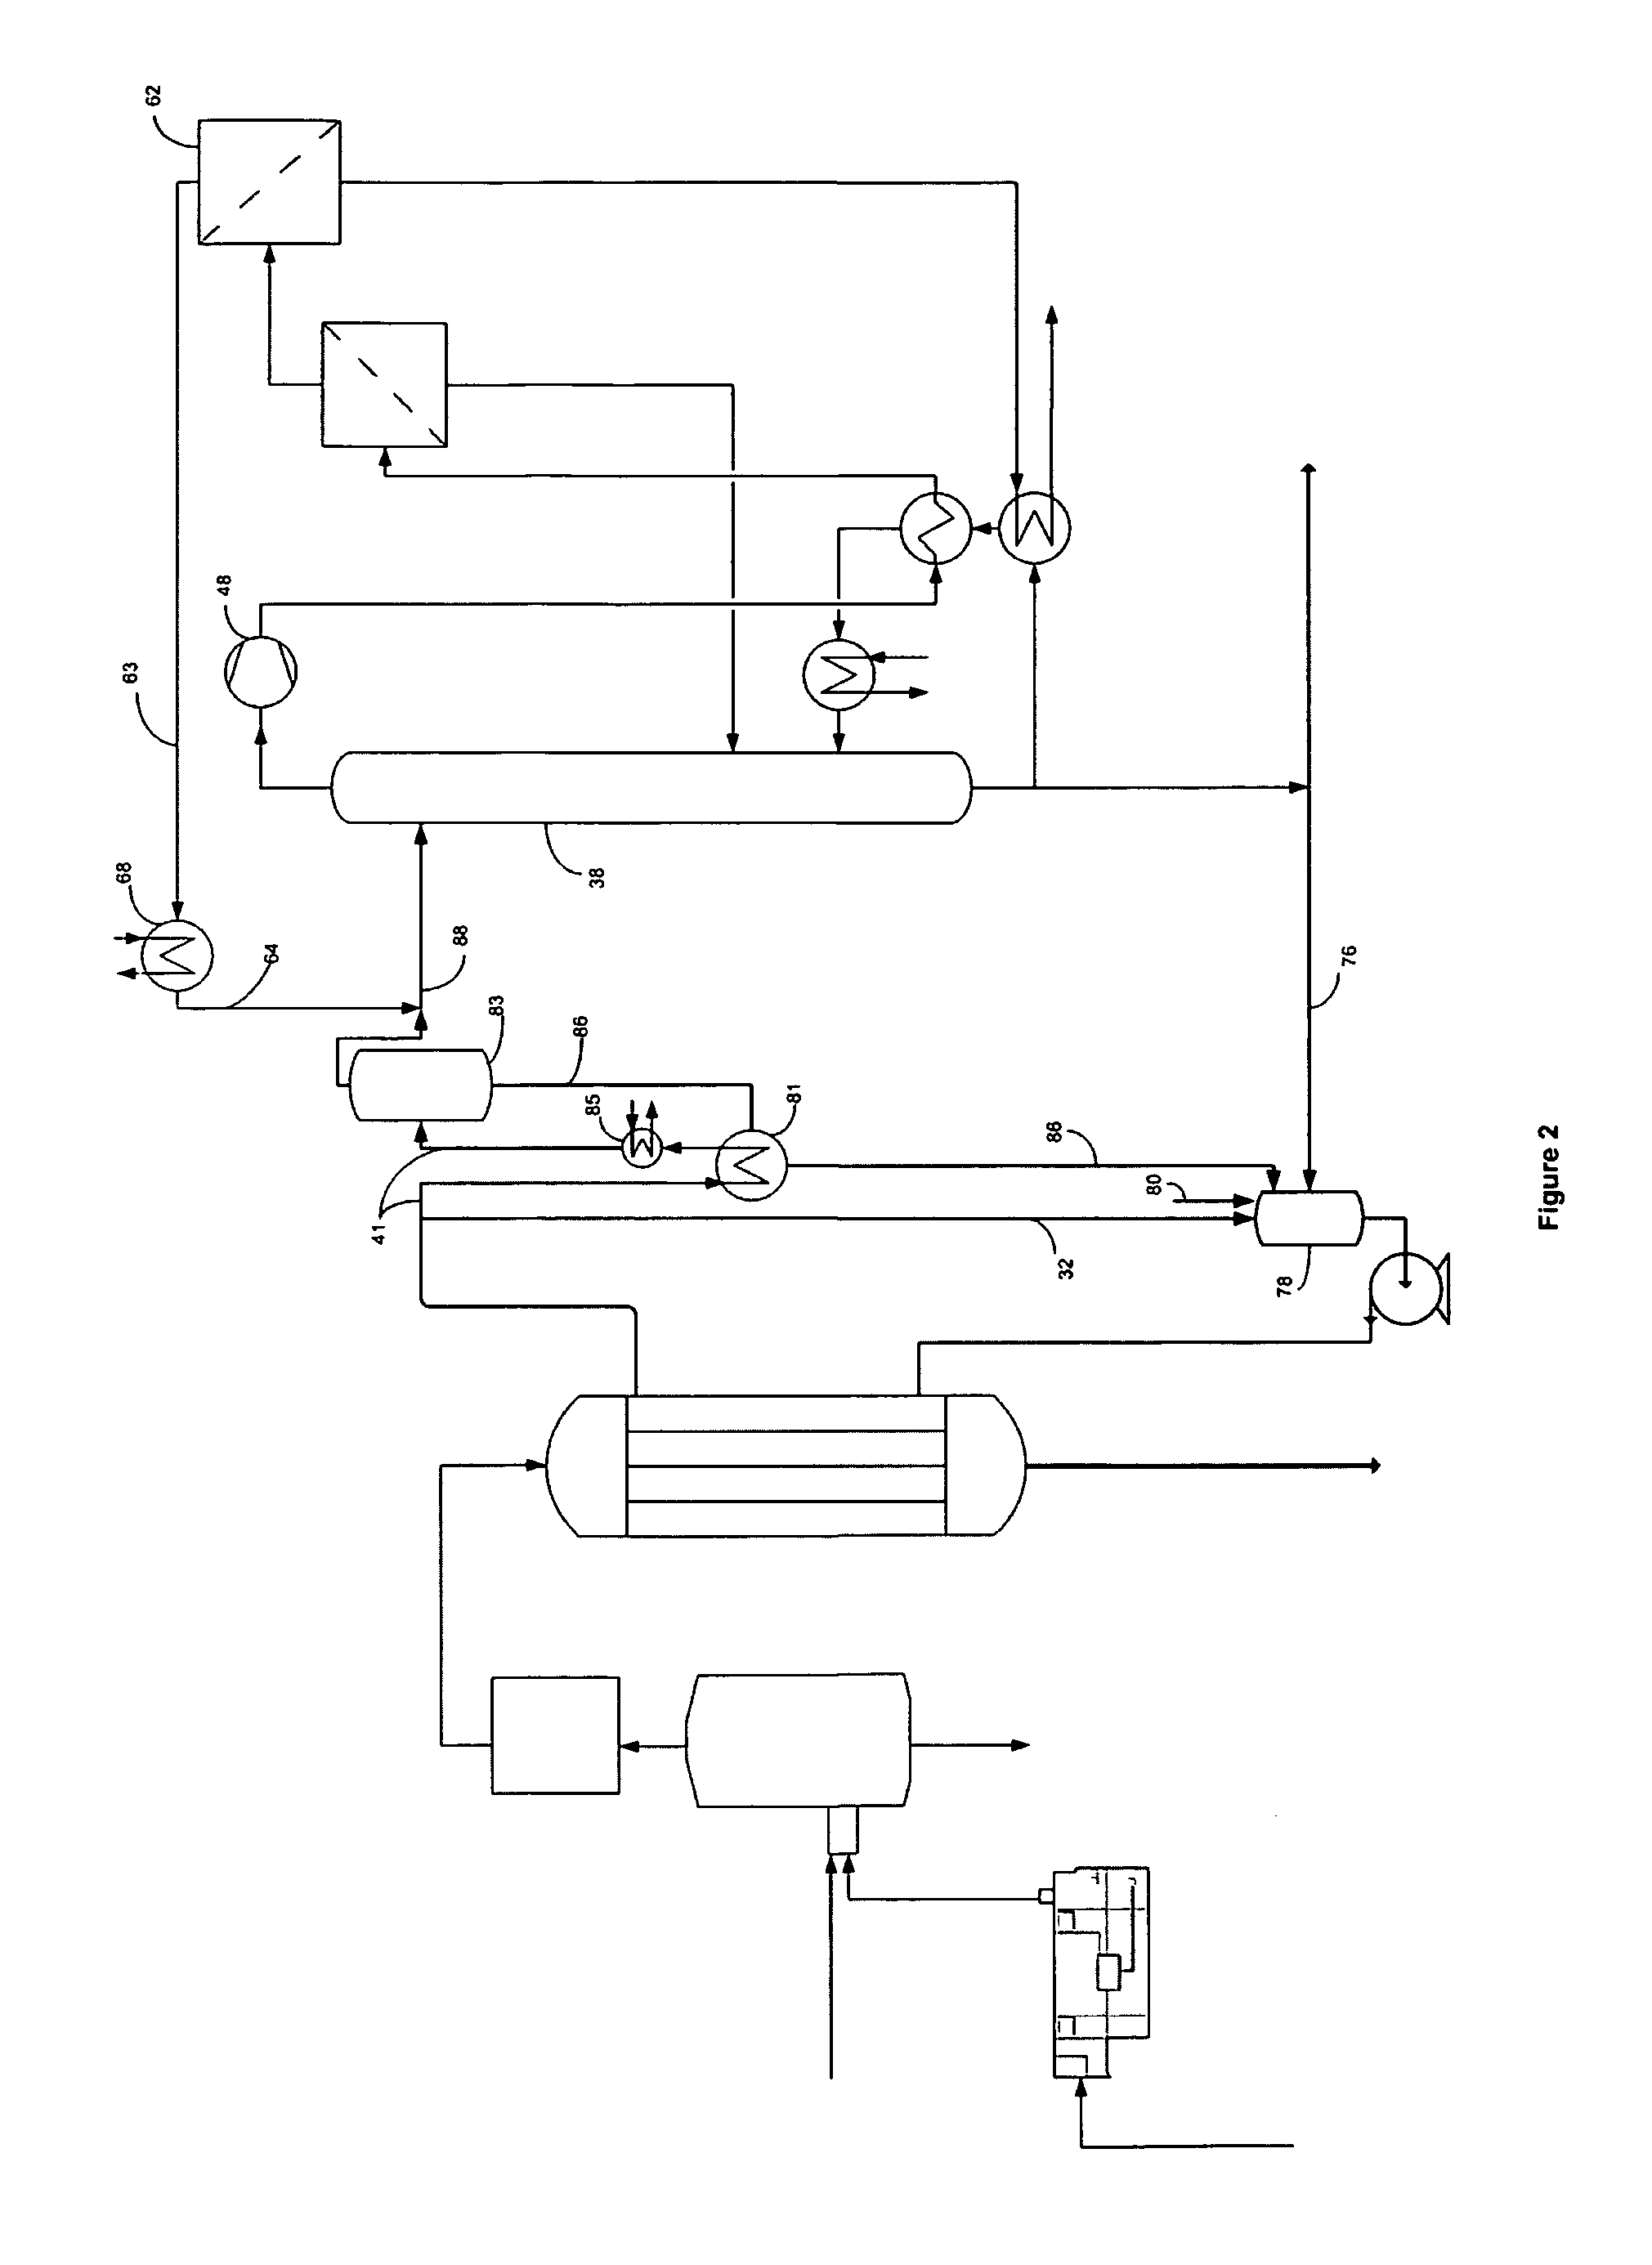 Ethanol recovery process and apparatus for biological conversion of syngas components to liquid products